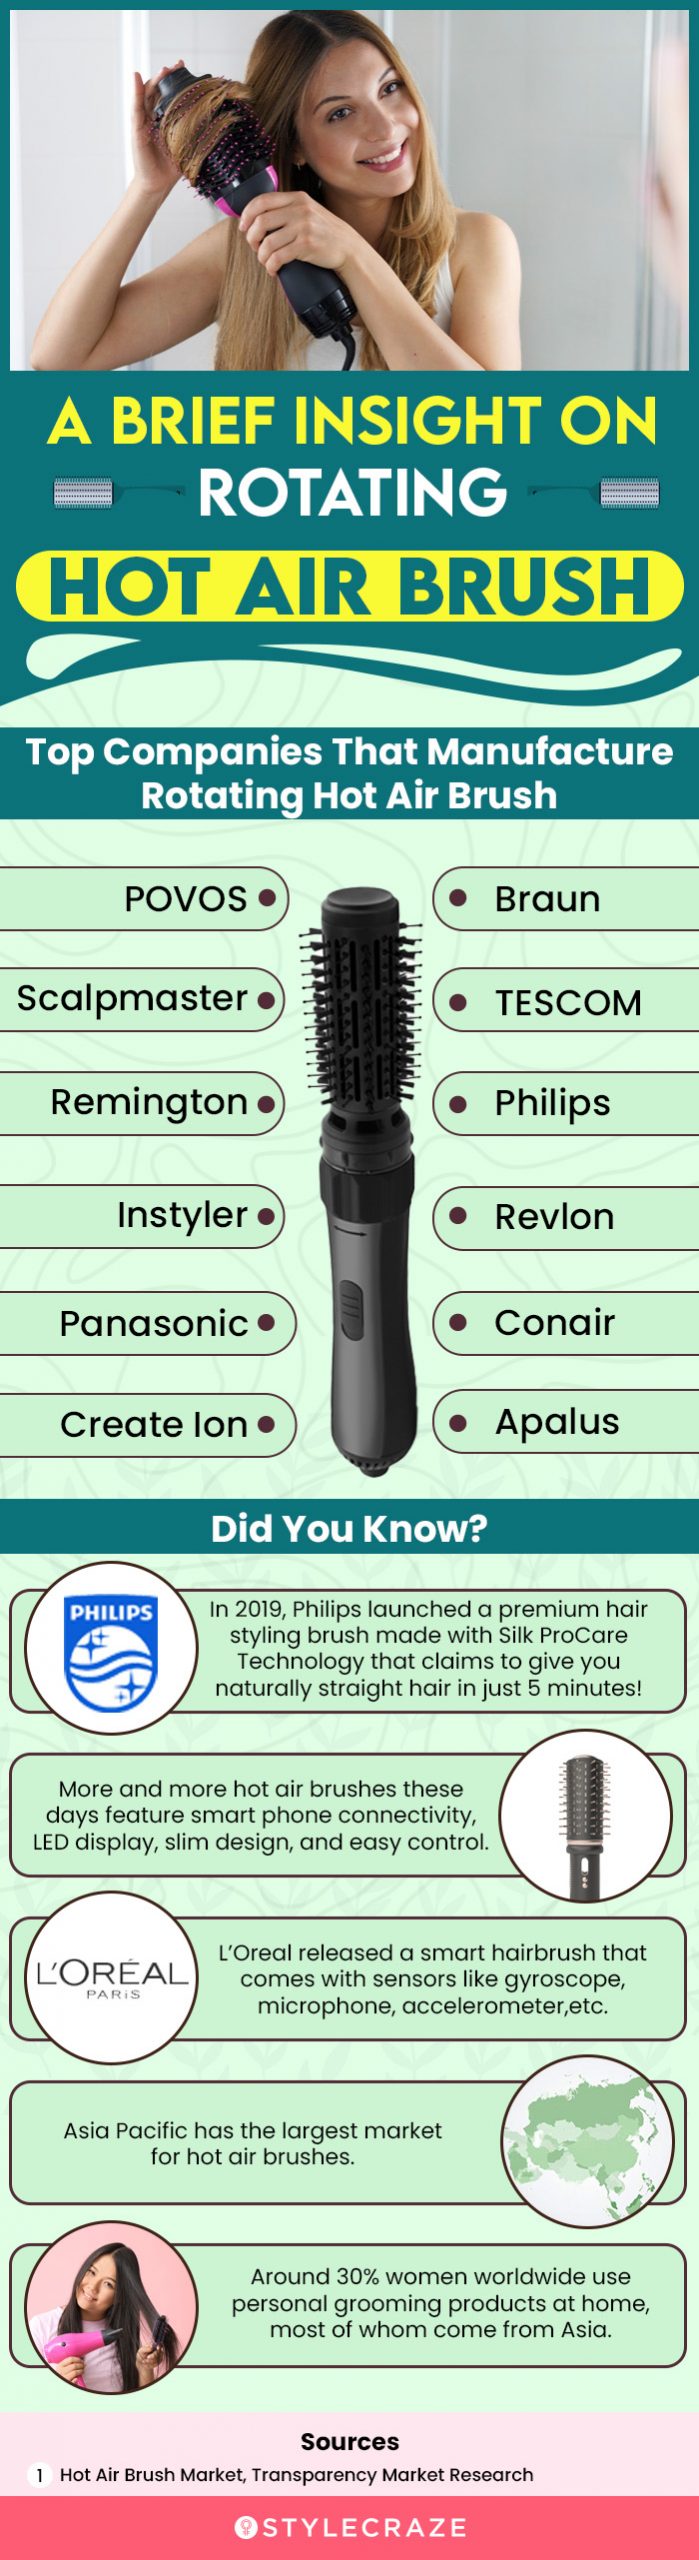 A Brief Insight On Rotating Hot Air Brush (infographic)